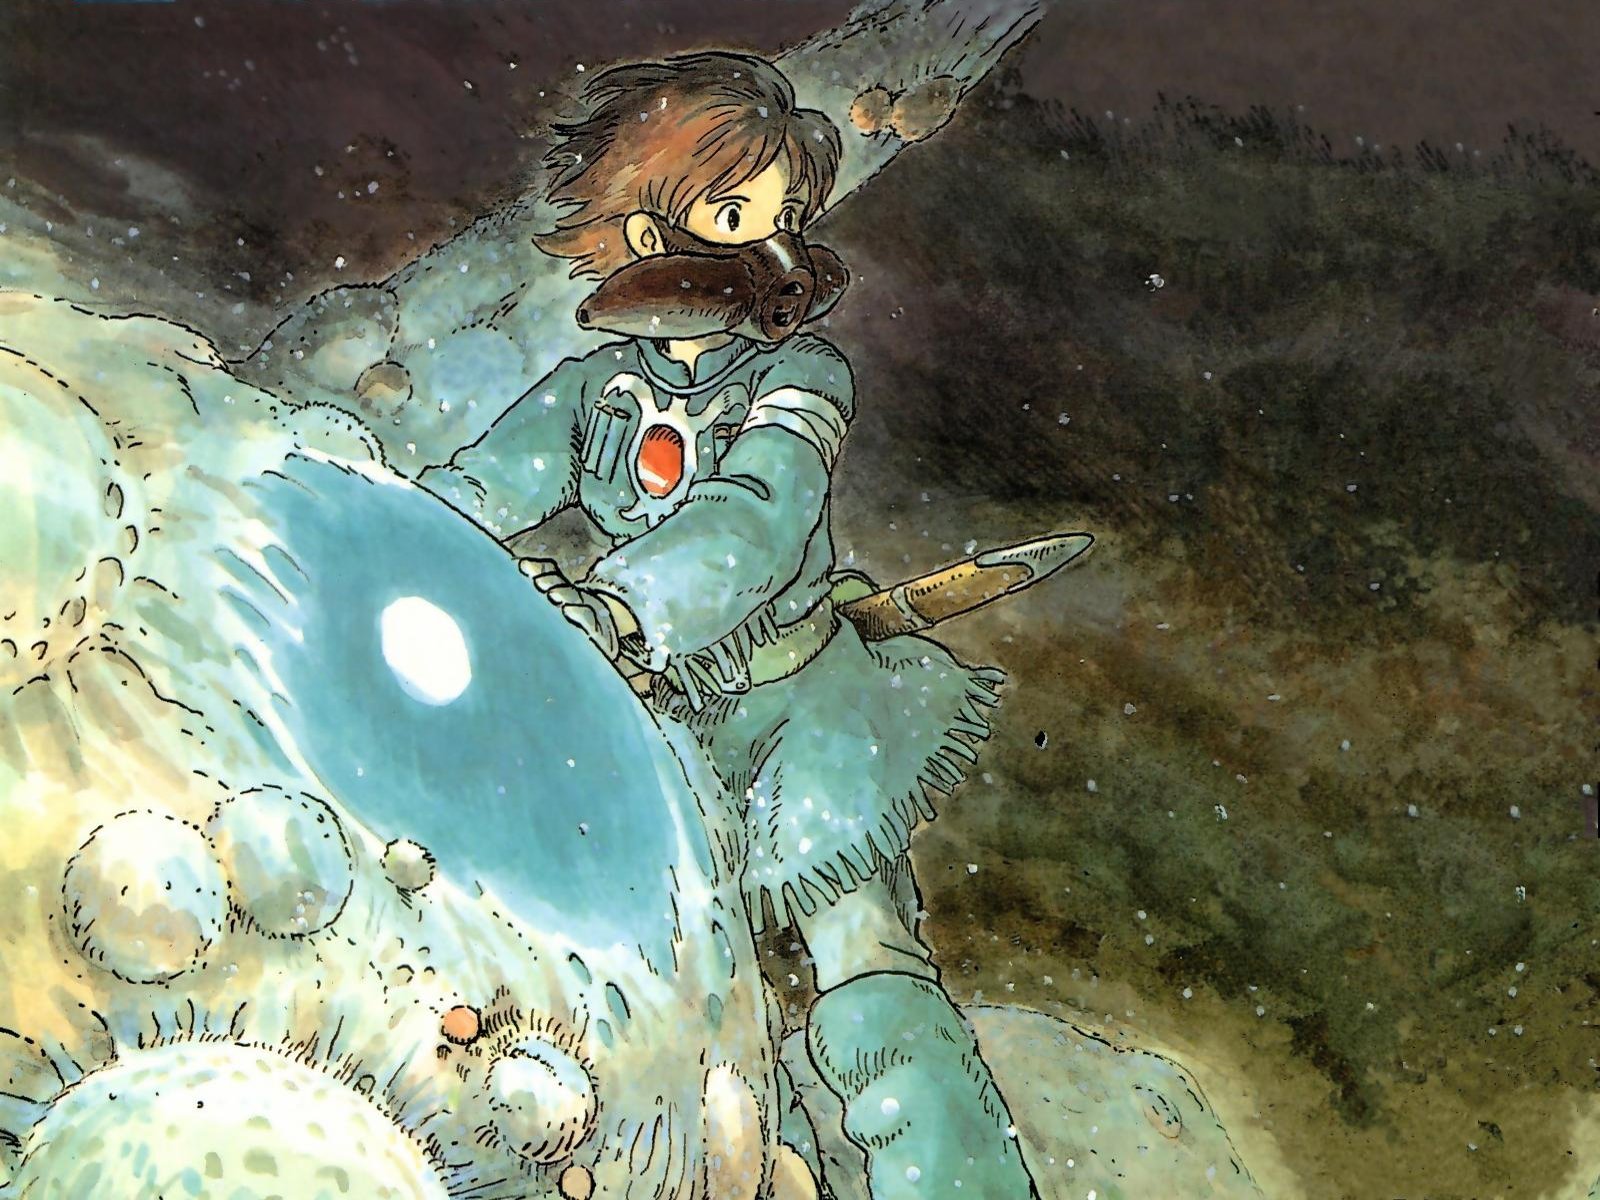 nausicaa of the valley of the wind characters